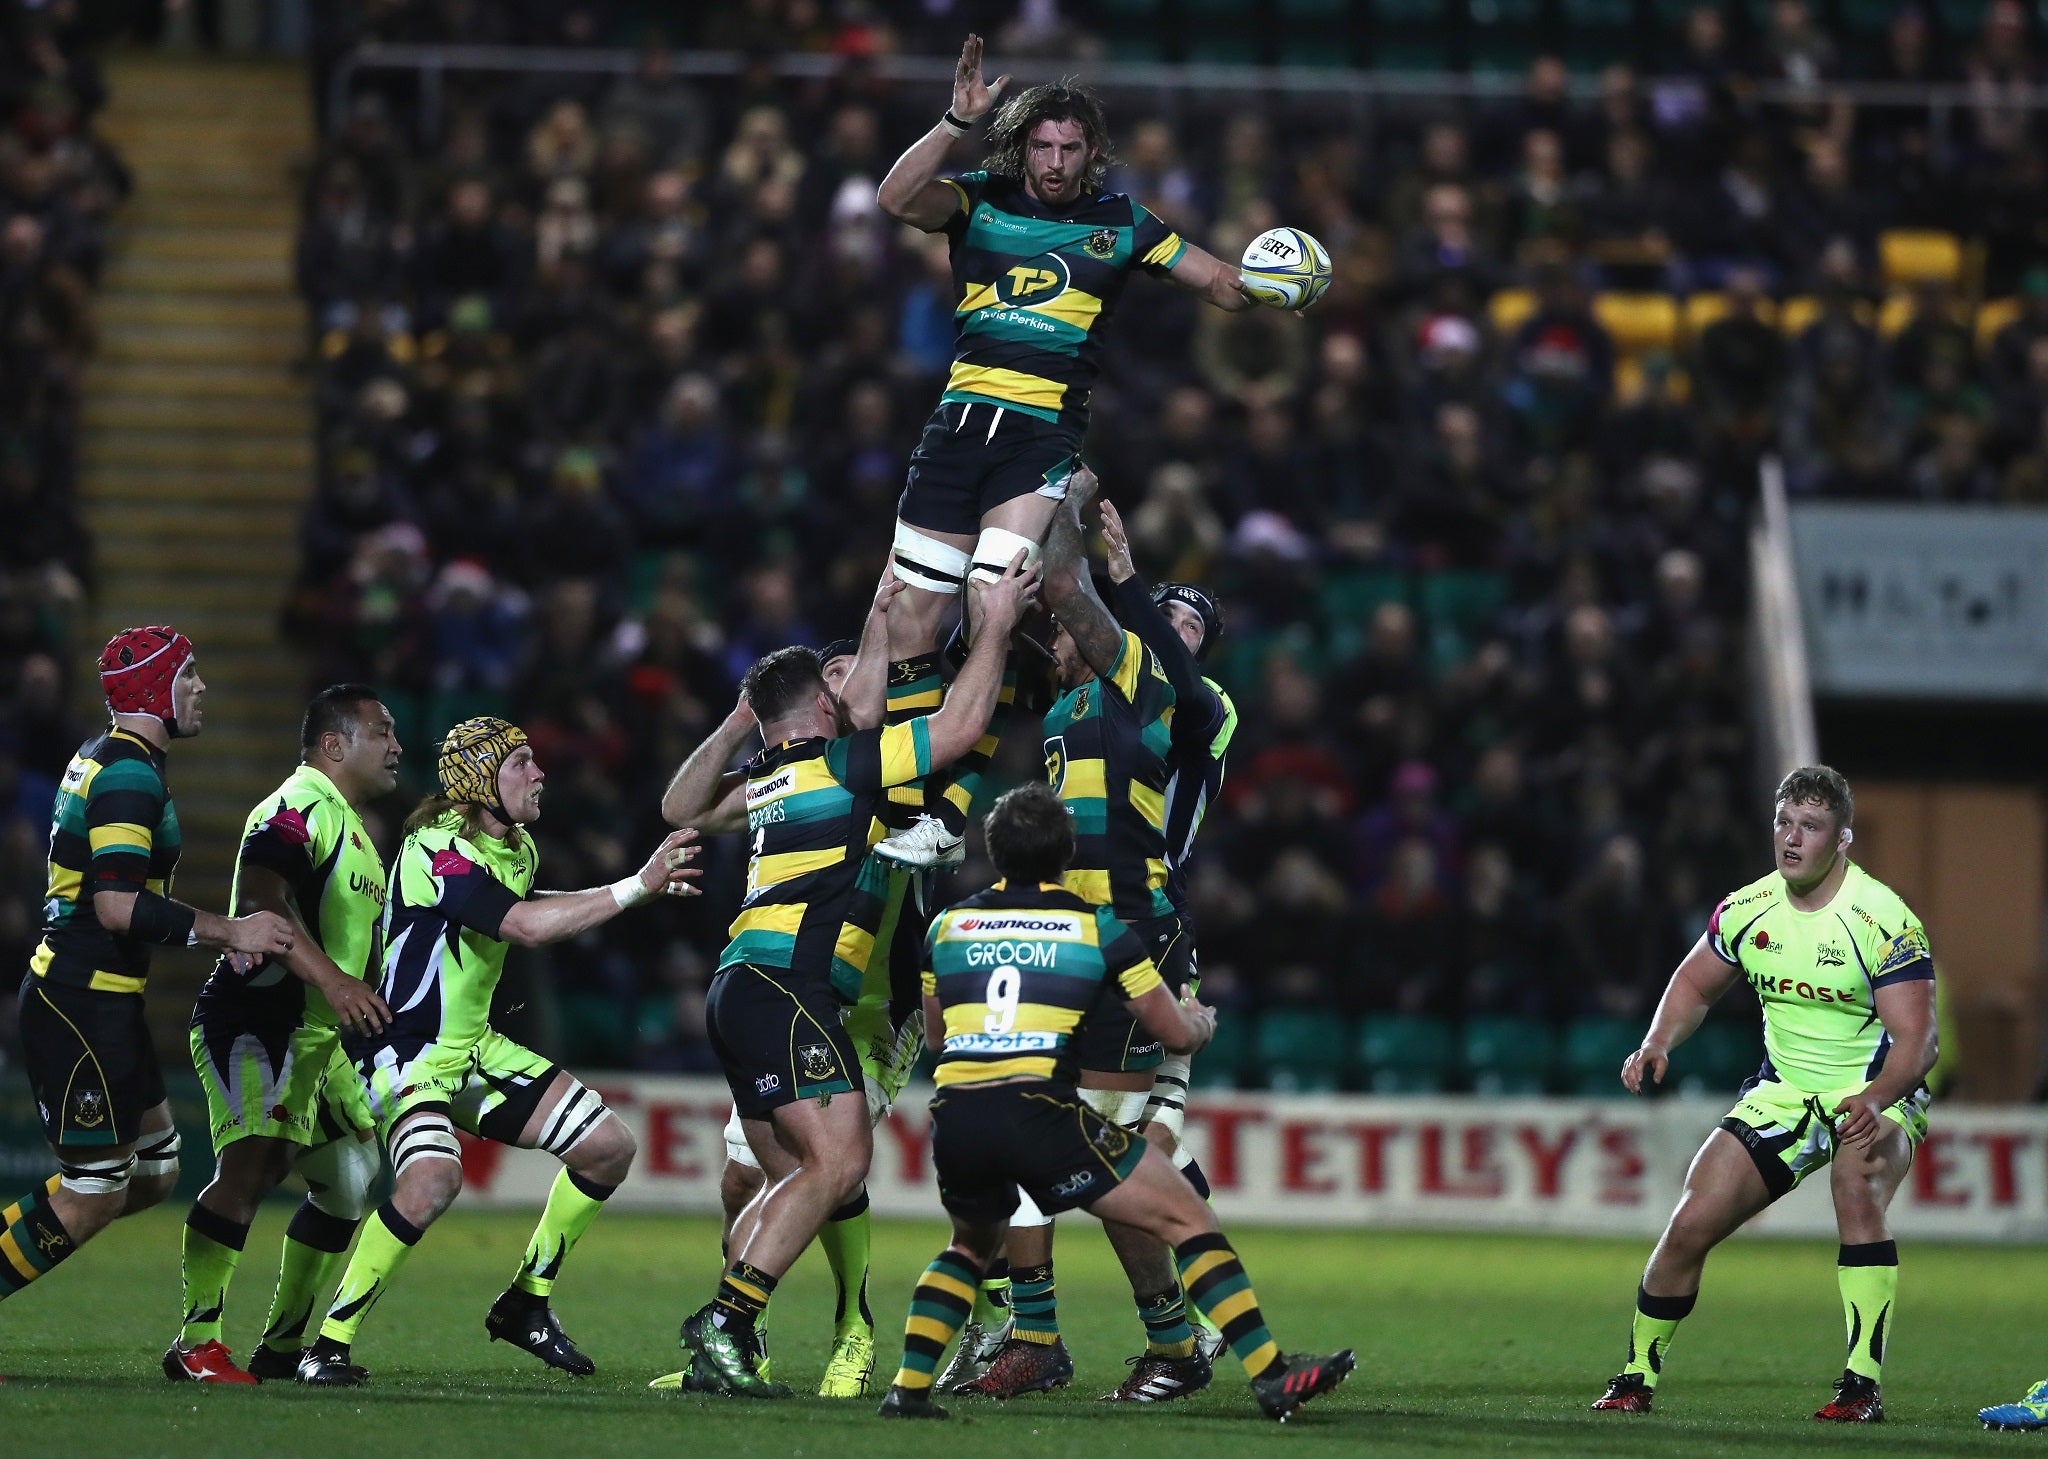 Tom Wood scored a try for Northampton Saints and starred in defence